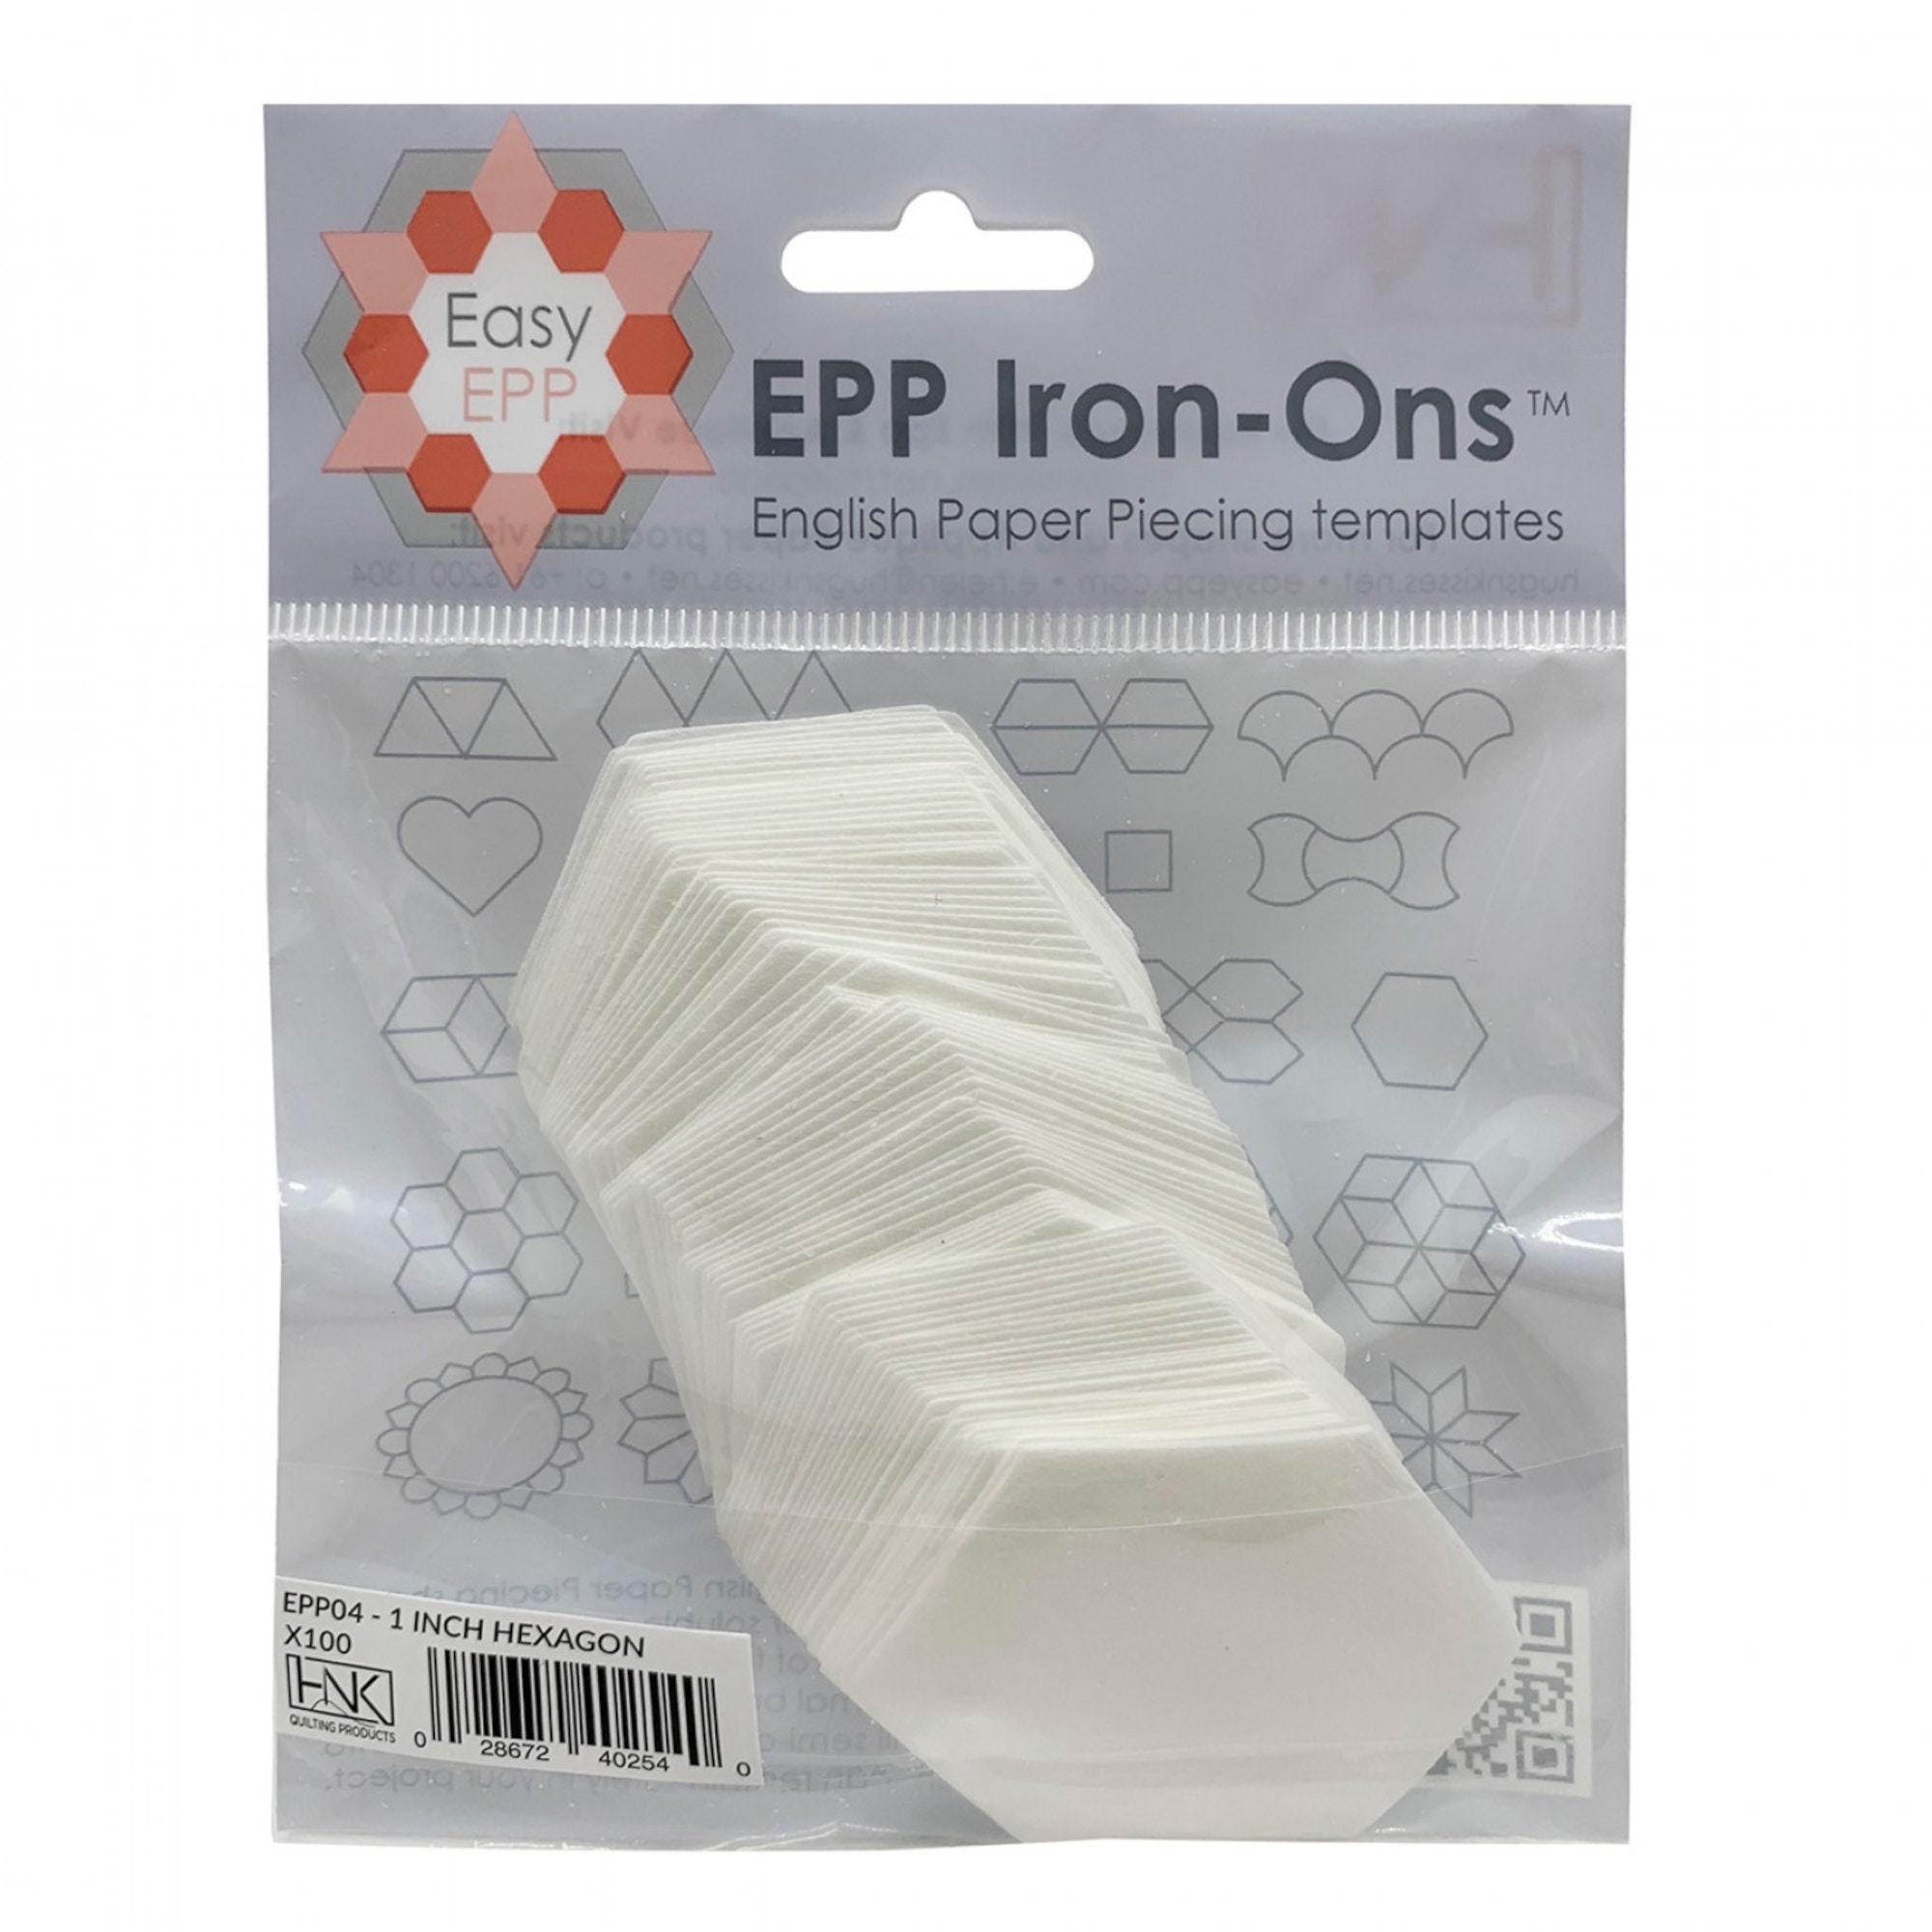 EPP Iron-Ons English Paper Piecing Templates *1 Hexagon - 100 pieces* By:  Hugs 'n Kisses